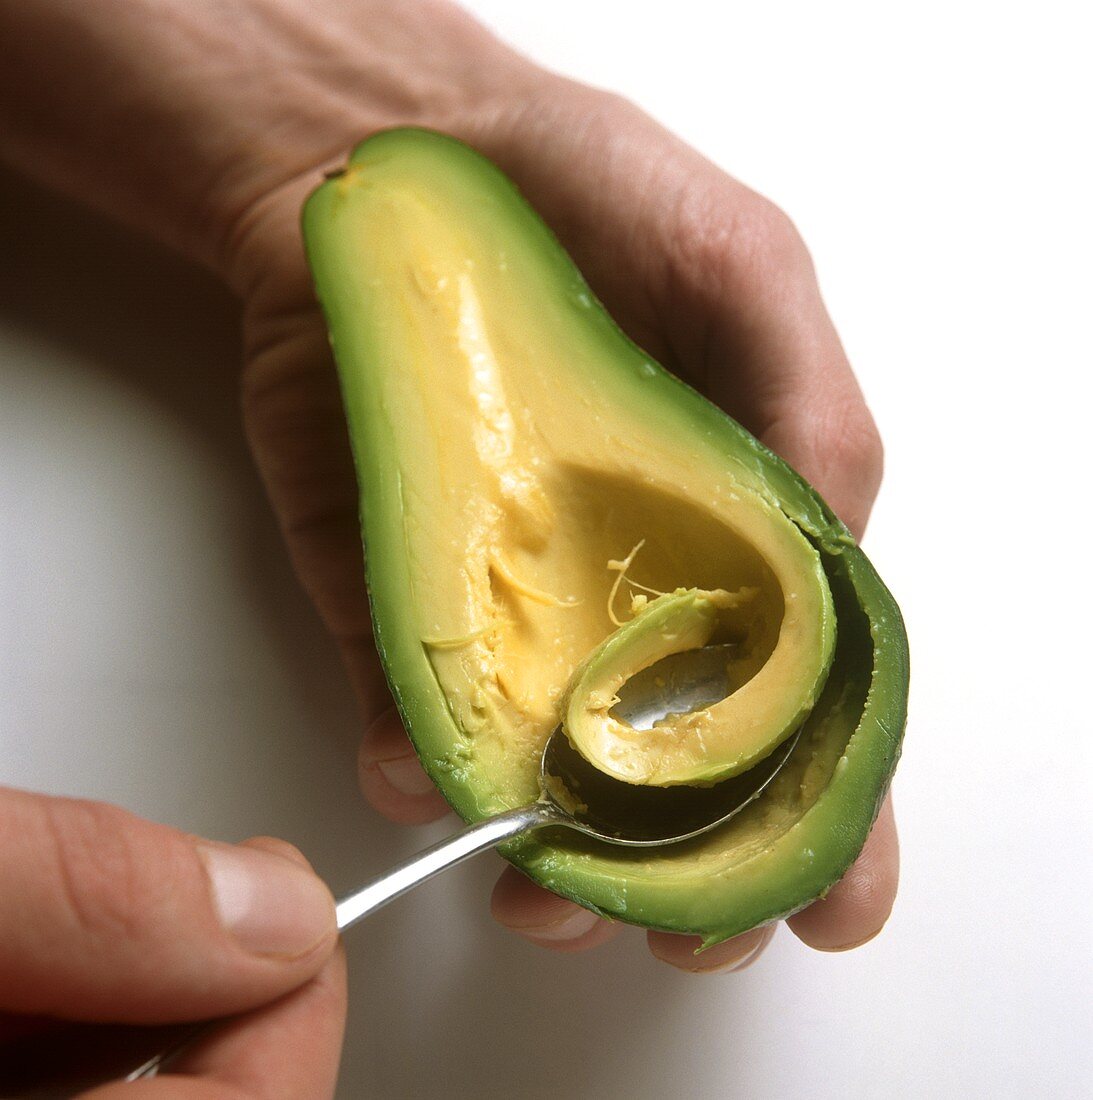 Hollowing out avocado with a spoon